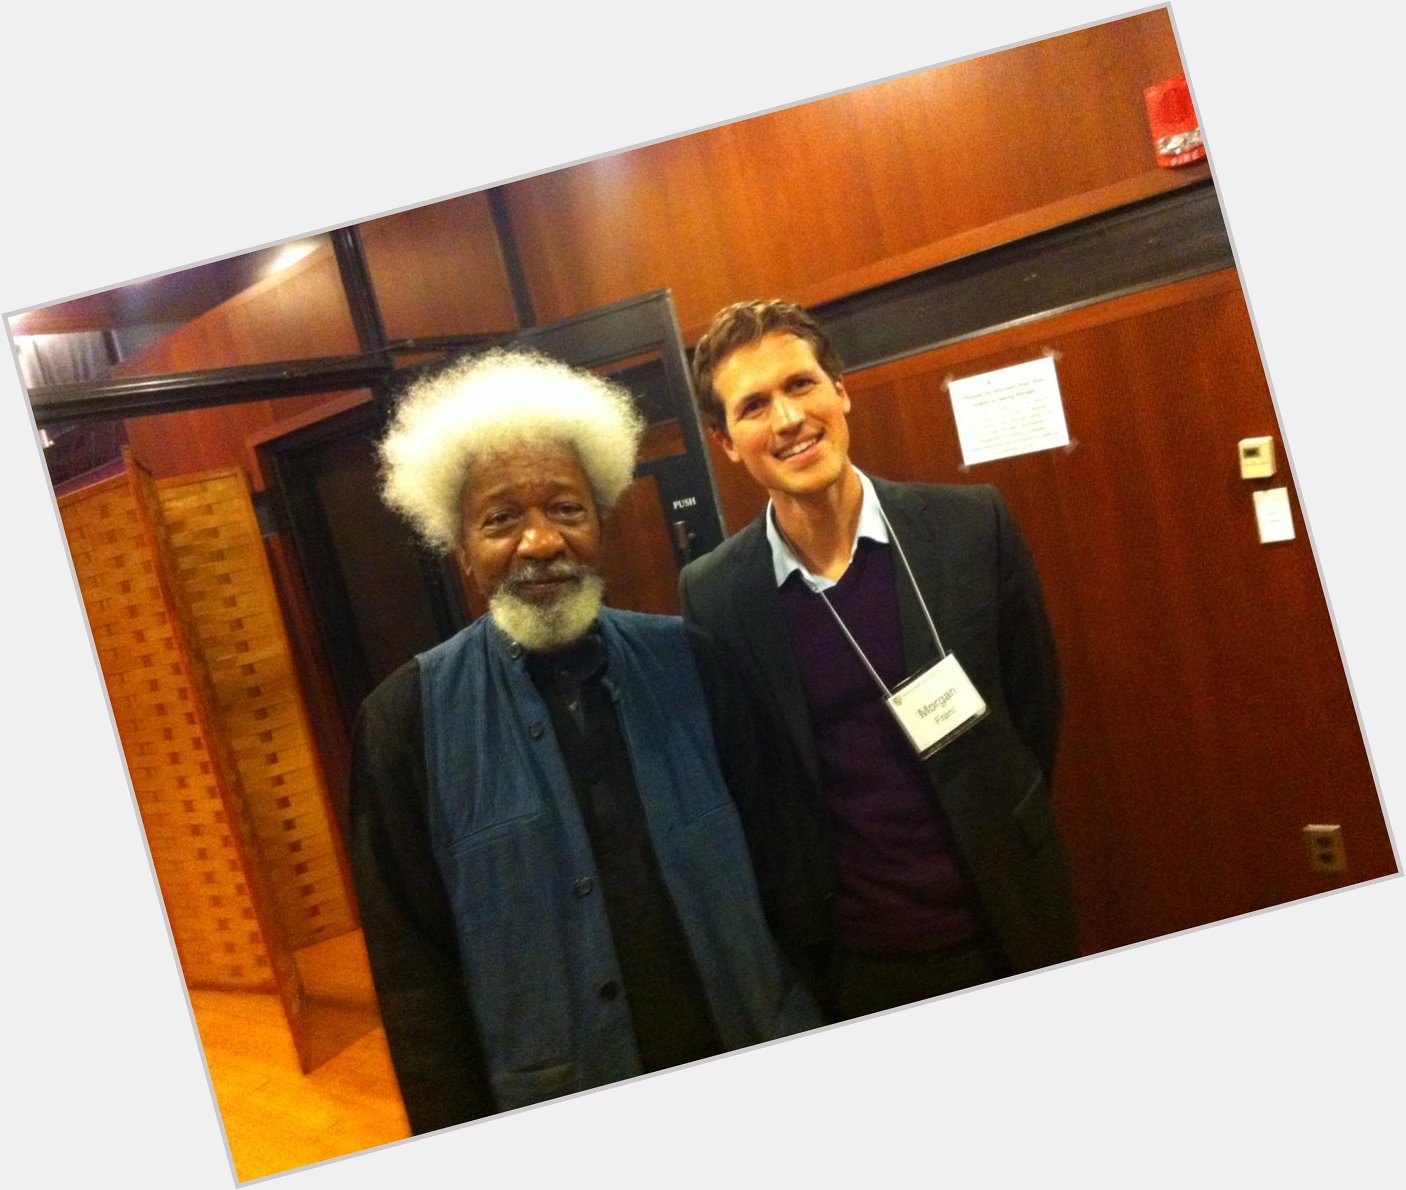 Happy Birthday Wole Soyinka! A fantastic writer and a great African man. Proud I met you. 